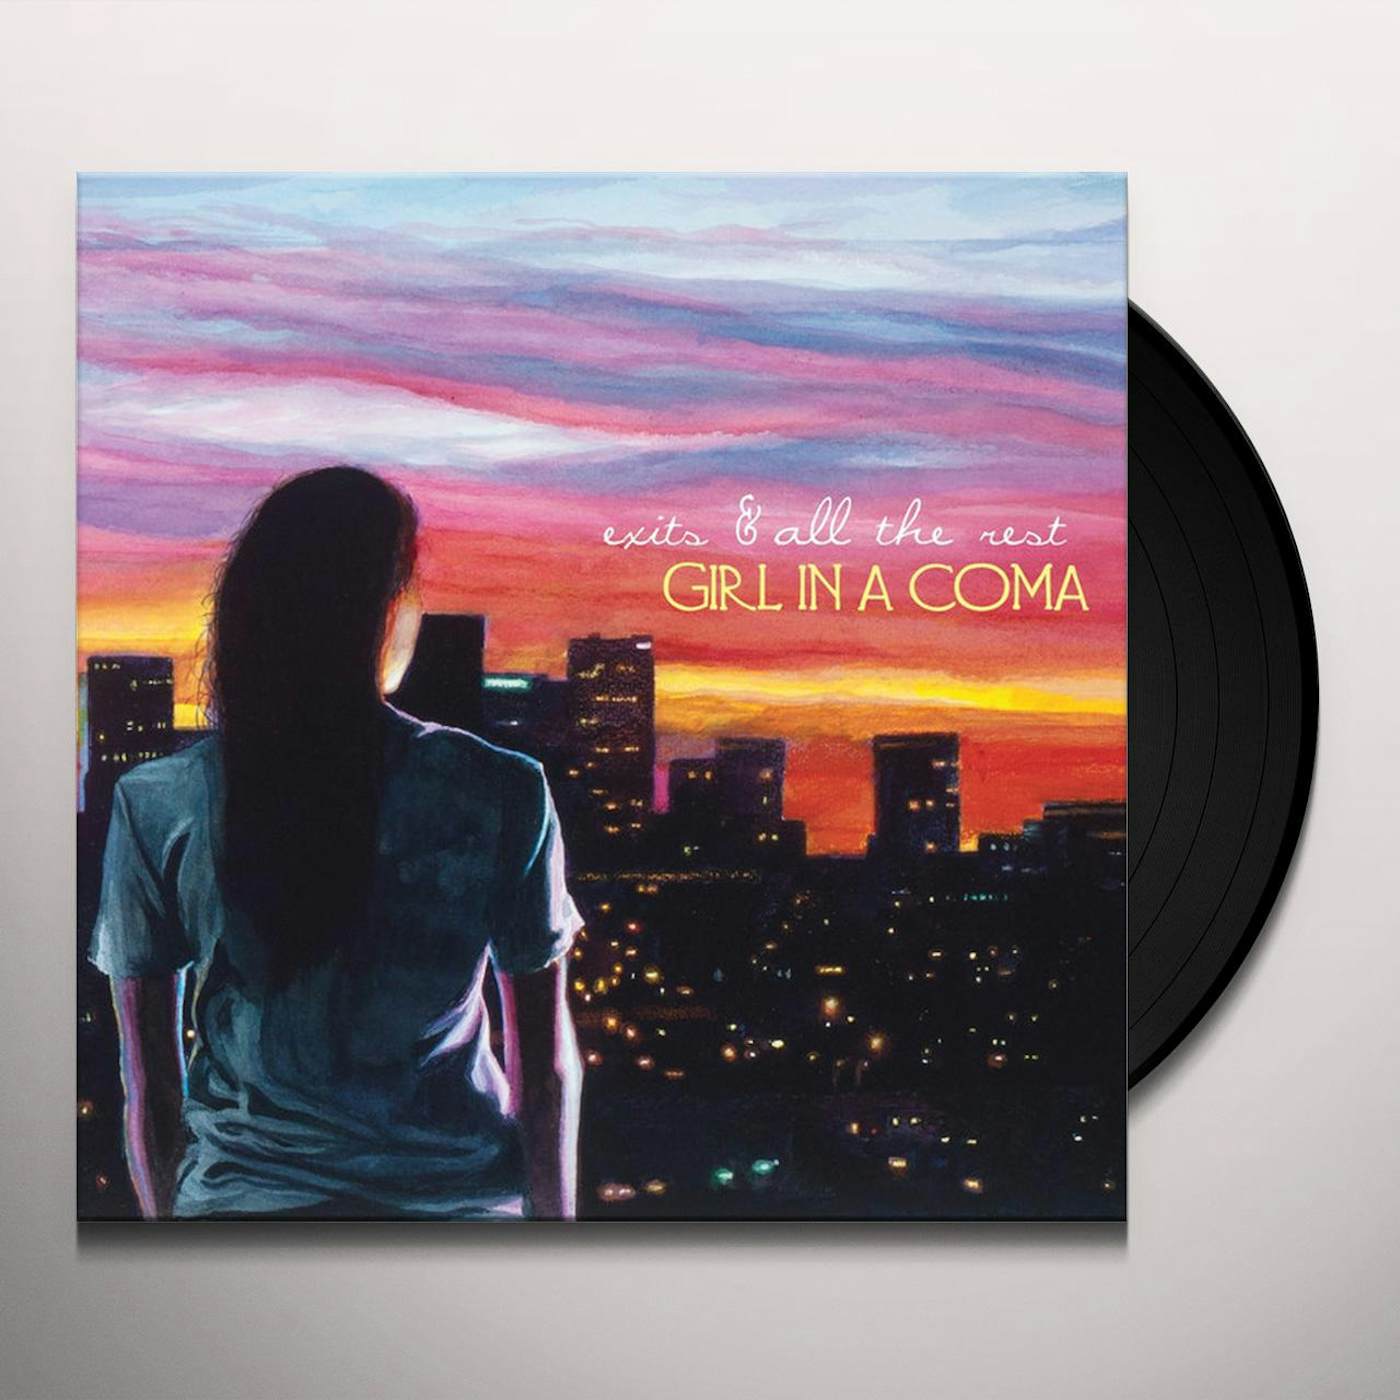 Girl In a Coma Exits & All the Rest Vinyl Record